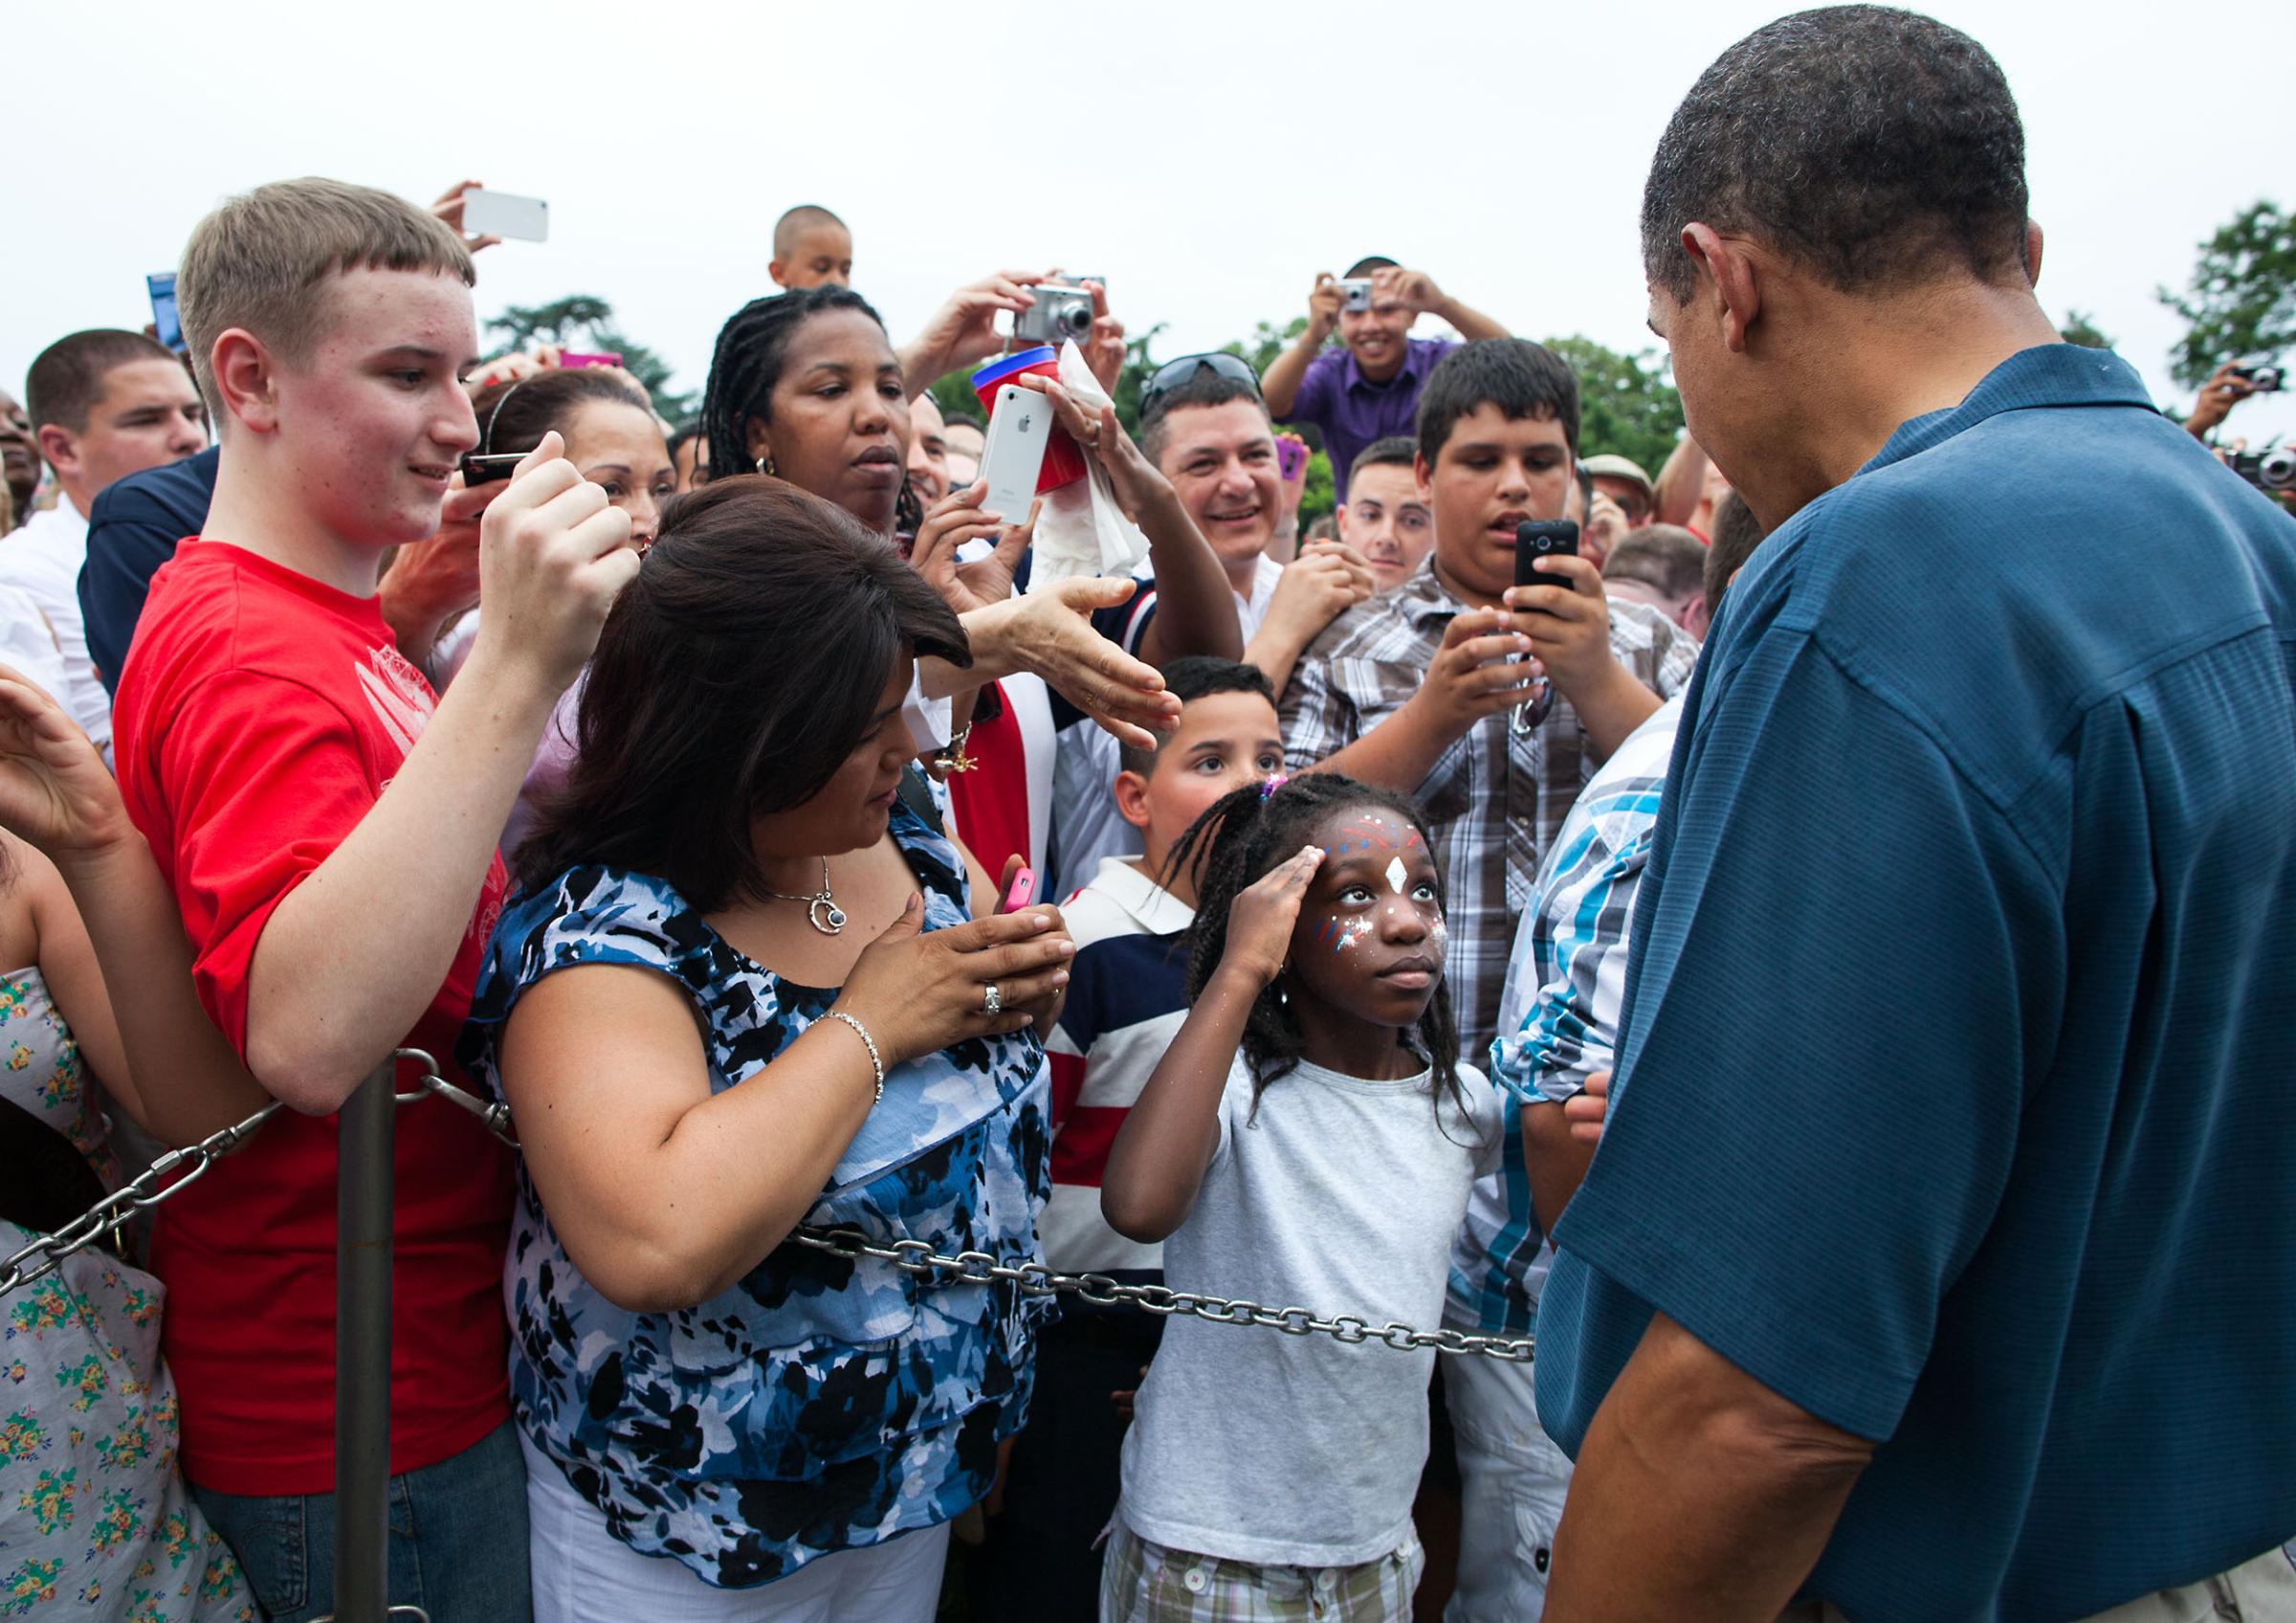 President Barack Obama and First Lady Michelle Obama welcome military families attending the Fourth of July celebration on the South Lawn of the White House, July 4, 2011. (Official White House Photo by Pete Souza)A young girl salutes President Barack Obama as he shakes hands along a ropeline with members of the military and their families during the Fourth of July celebration on the South Lawn of the White House, July 4, 2011. (Official White House Photo by Pete Souza)July 4, 2011"I'm always trying to capture how people react to the President especially when he works a rope line. On the Fourth of July, the President was greeting members of the military and their families on the South Lawn when a young girl struck a salute as the President approached."(Official White House Photo by Pete Souza)